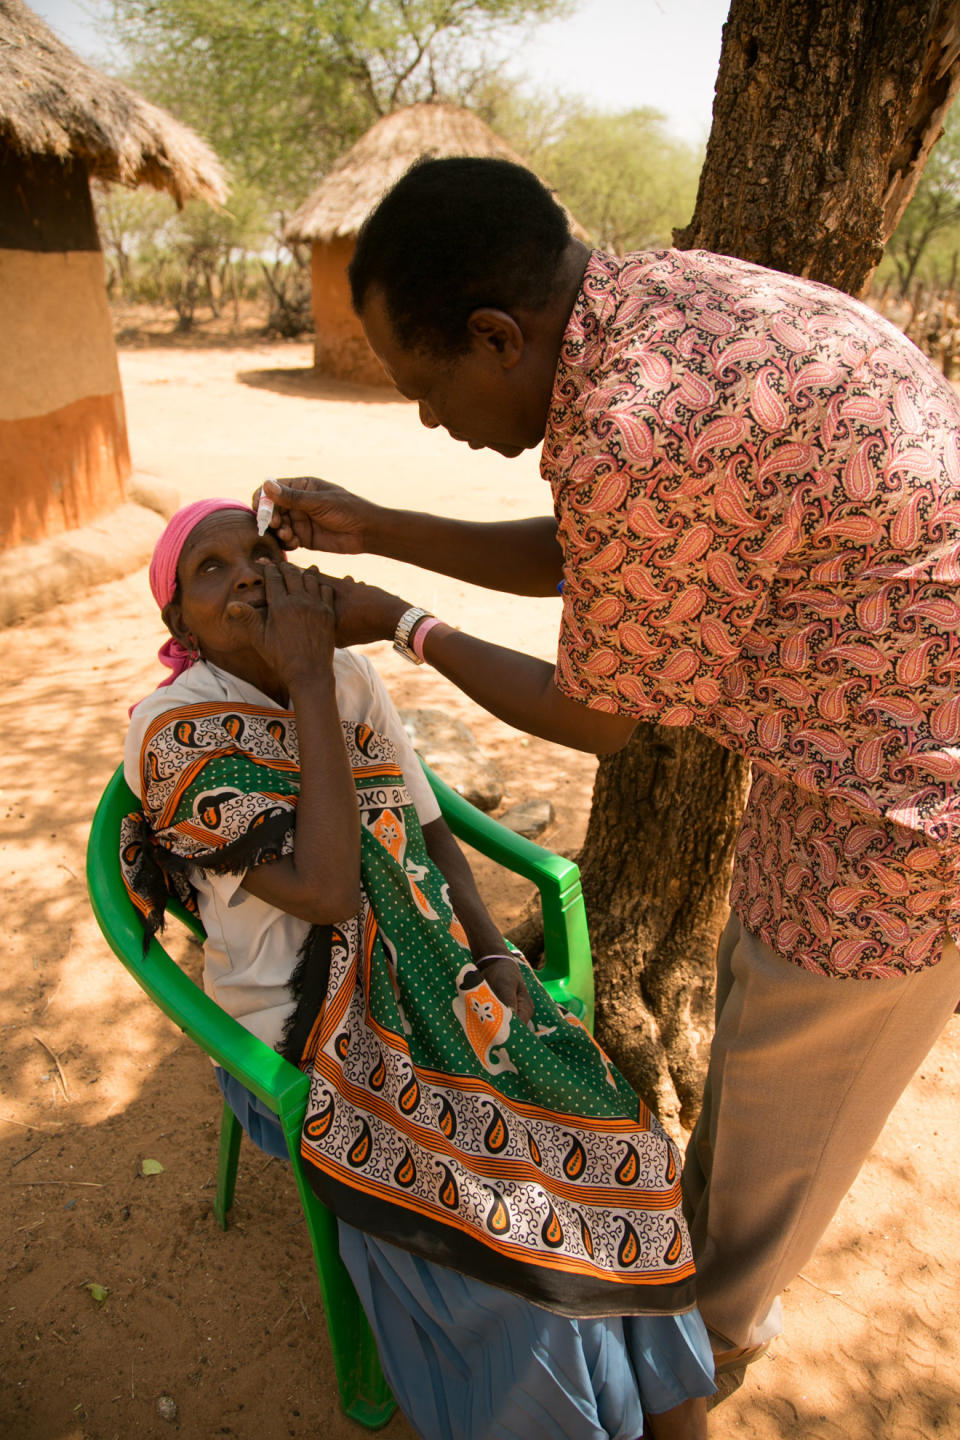 Dr. Michael Makari applies eyedrops to Chepserum&rsquo;s&nbsp;eyes during a follow-up visit. Makari has performed basic surgeries on trachoma sufferers in this remote area of Kenya, helping people like Chepserum to see again. (Photo: Zoe Flood)